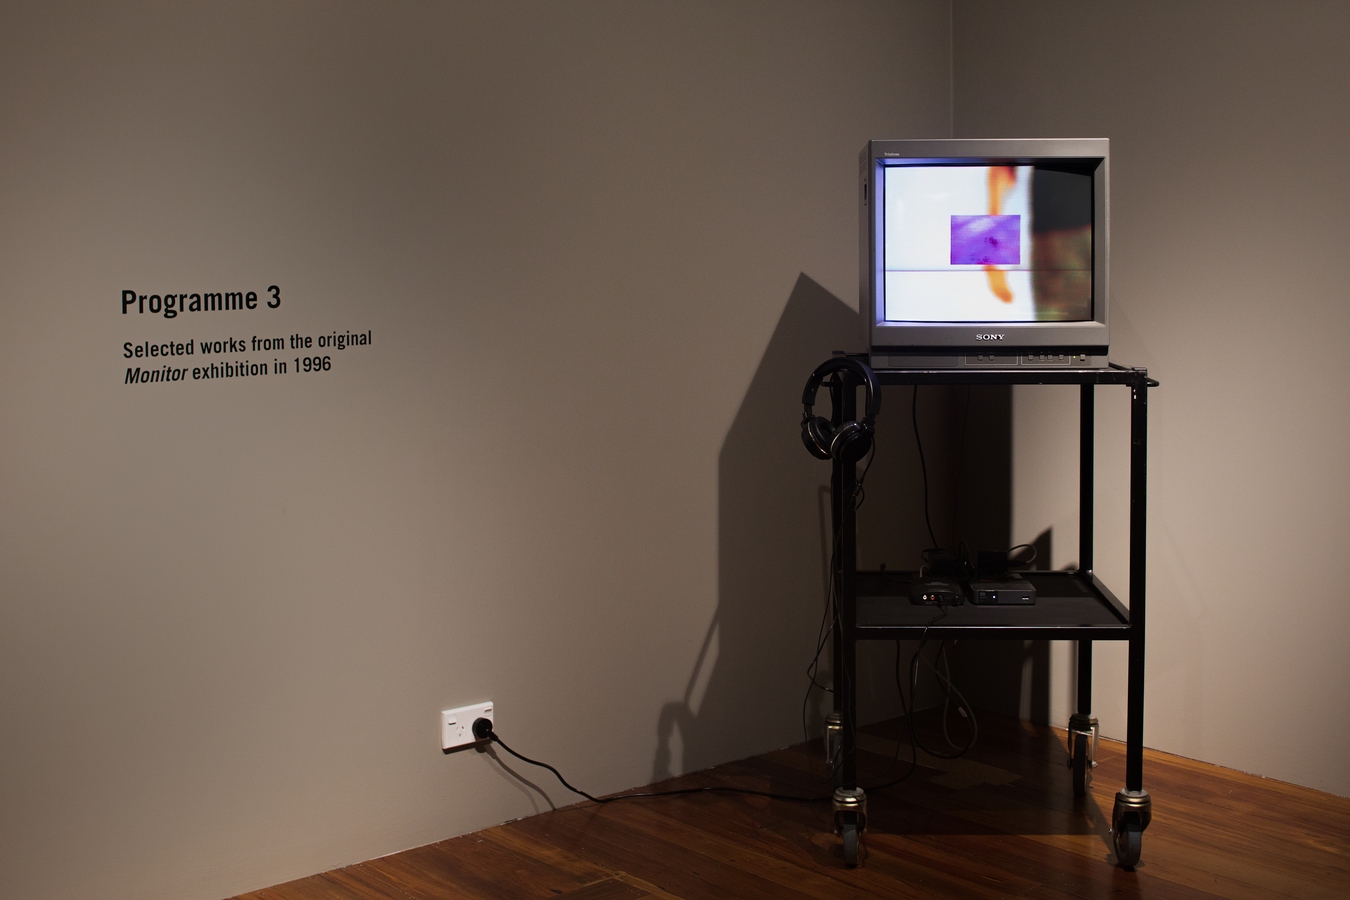 Image: Nathan Pōhio, Points of Reference (installation view), 1996. Part of Programme 3: Selected works from the original Monitor exhibition curated by Sean Kerr and David Watson. Photo: Janneth Gil.